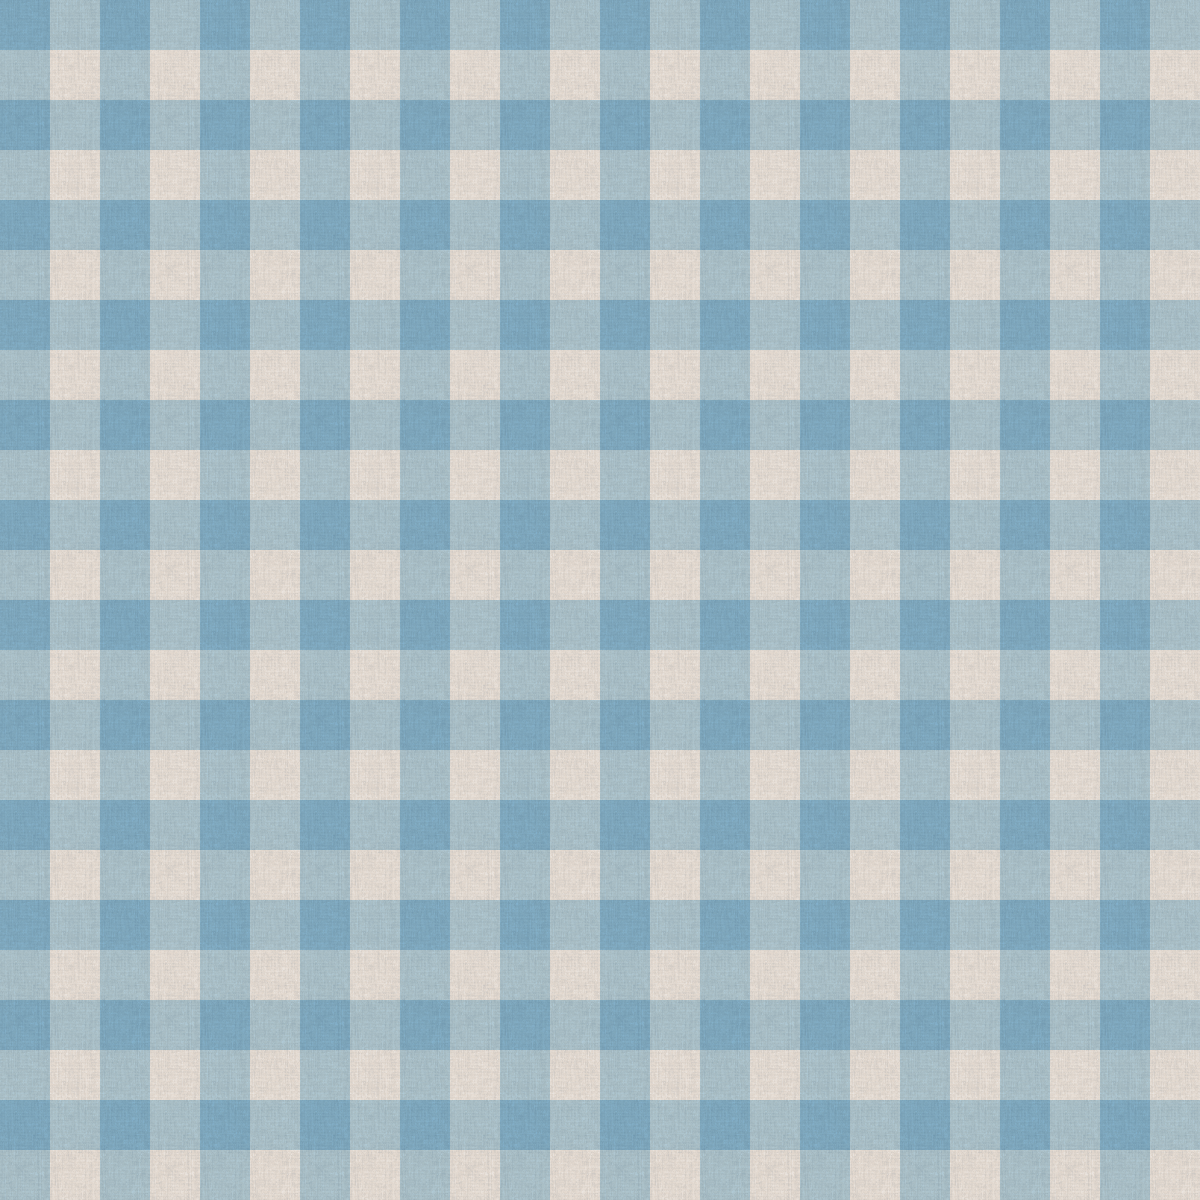 Blue and White Table Cloth Texture